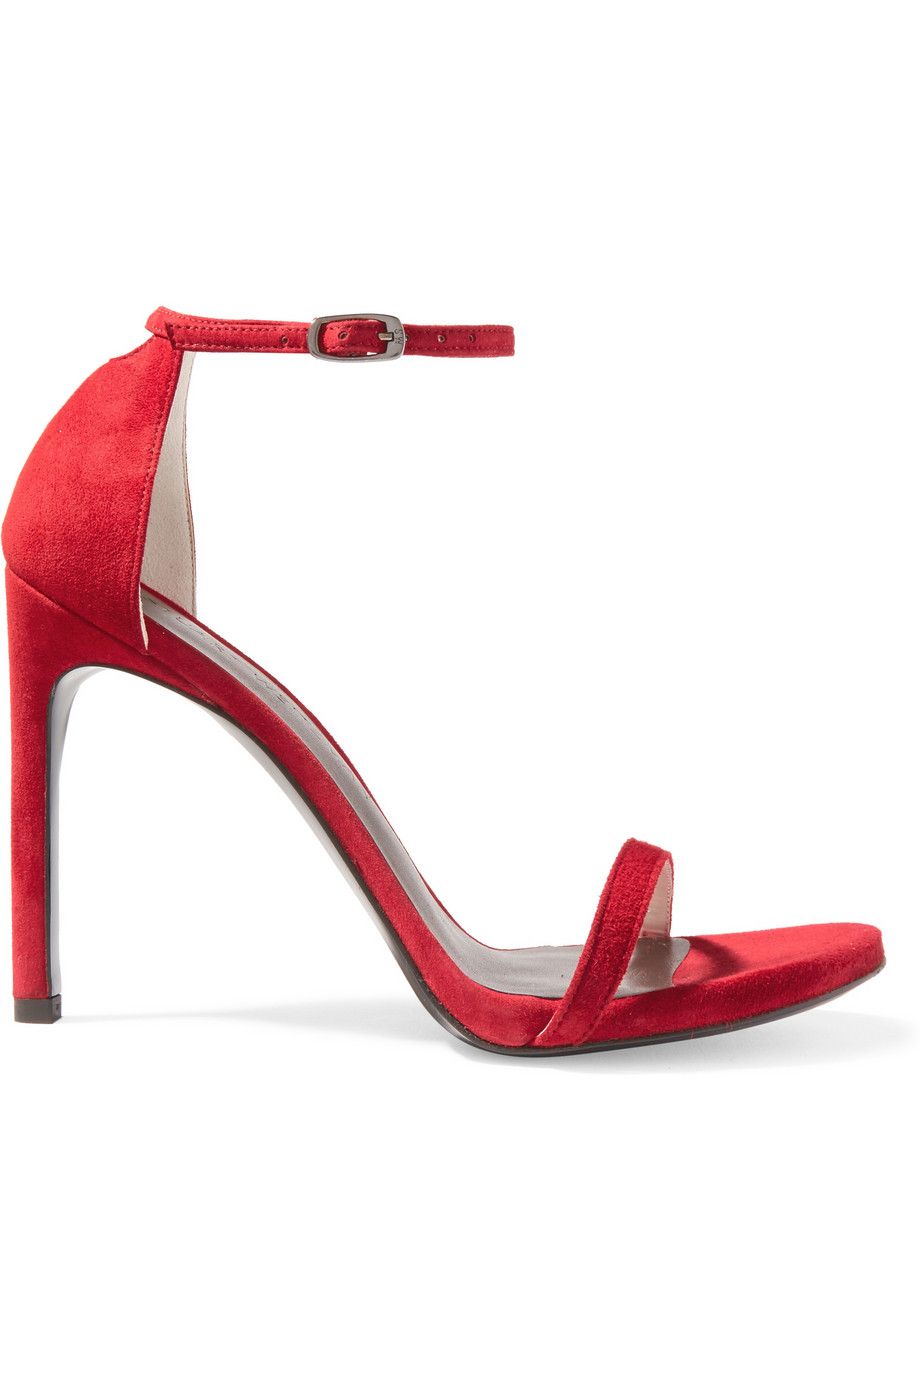 Red, High heels, Carmine, Maroon, Basic pump, Composite material, Bicycle part, Sandal, Foot, Court shoe, 